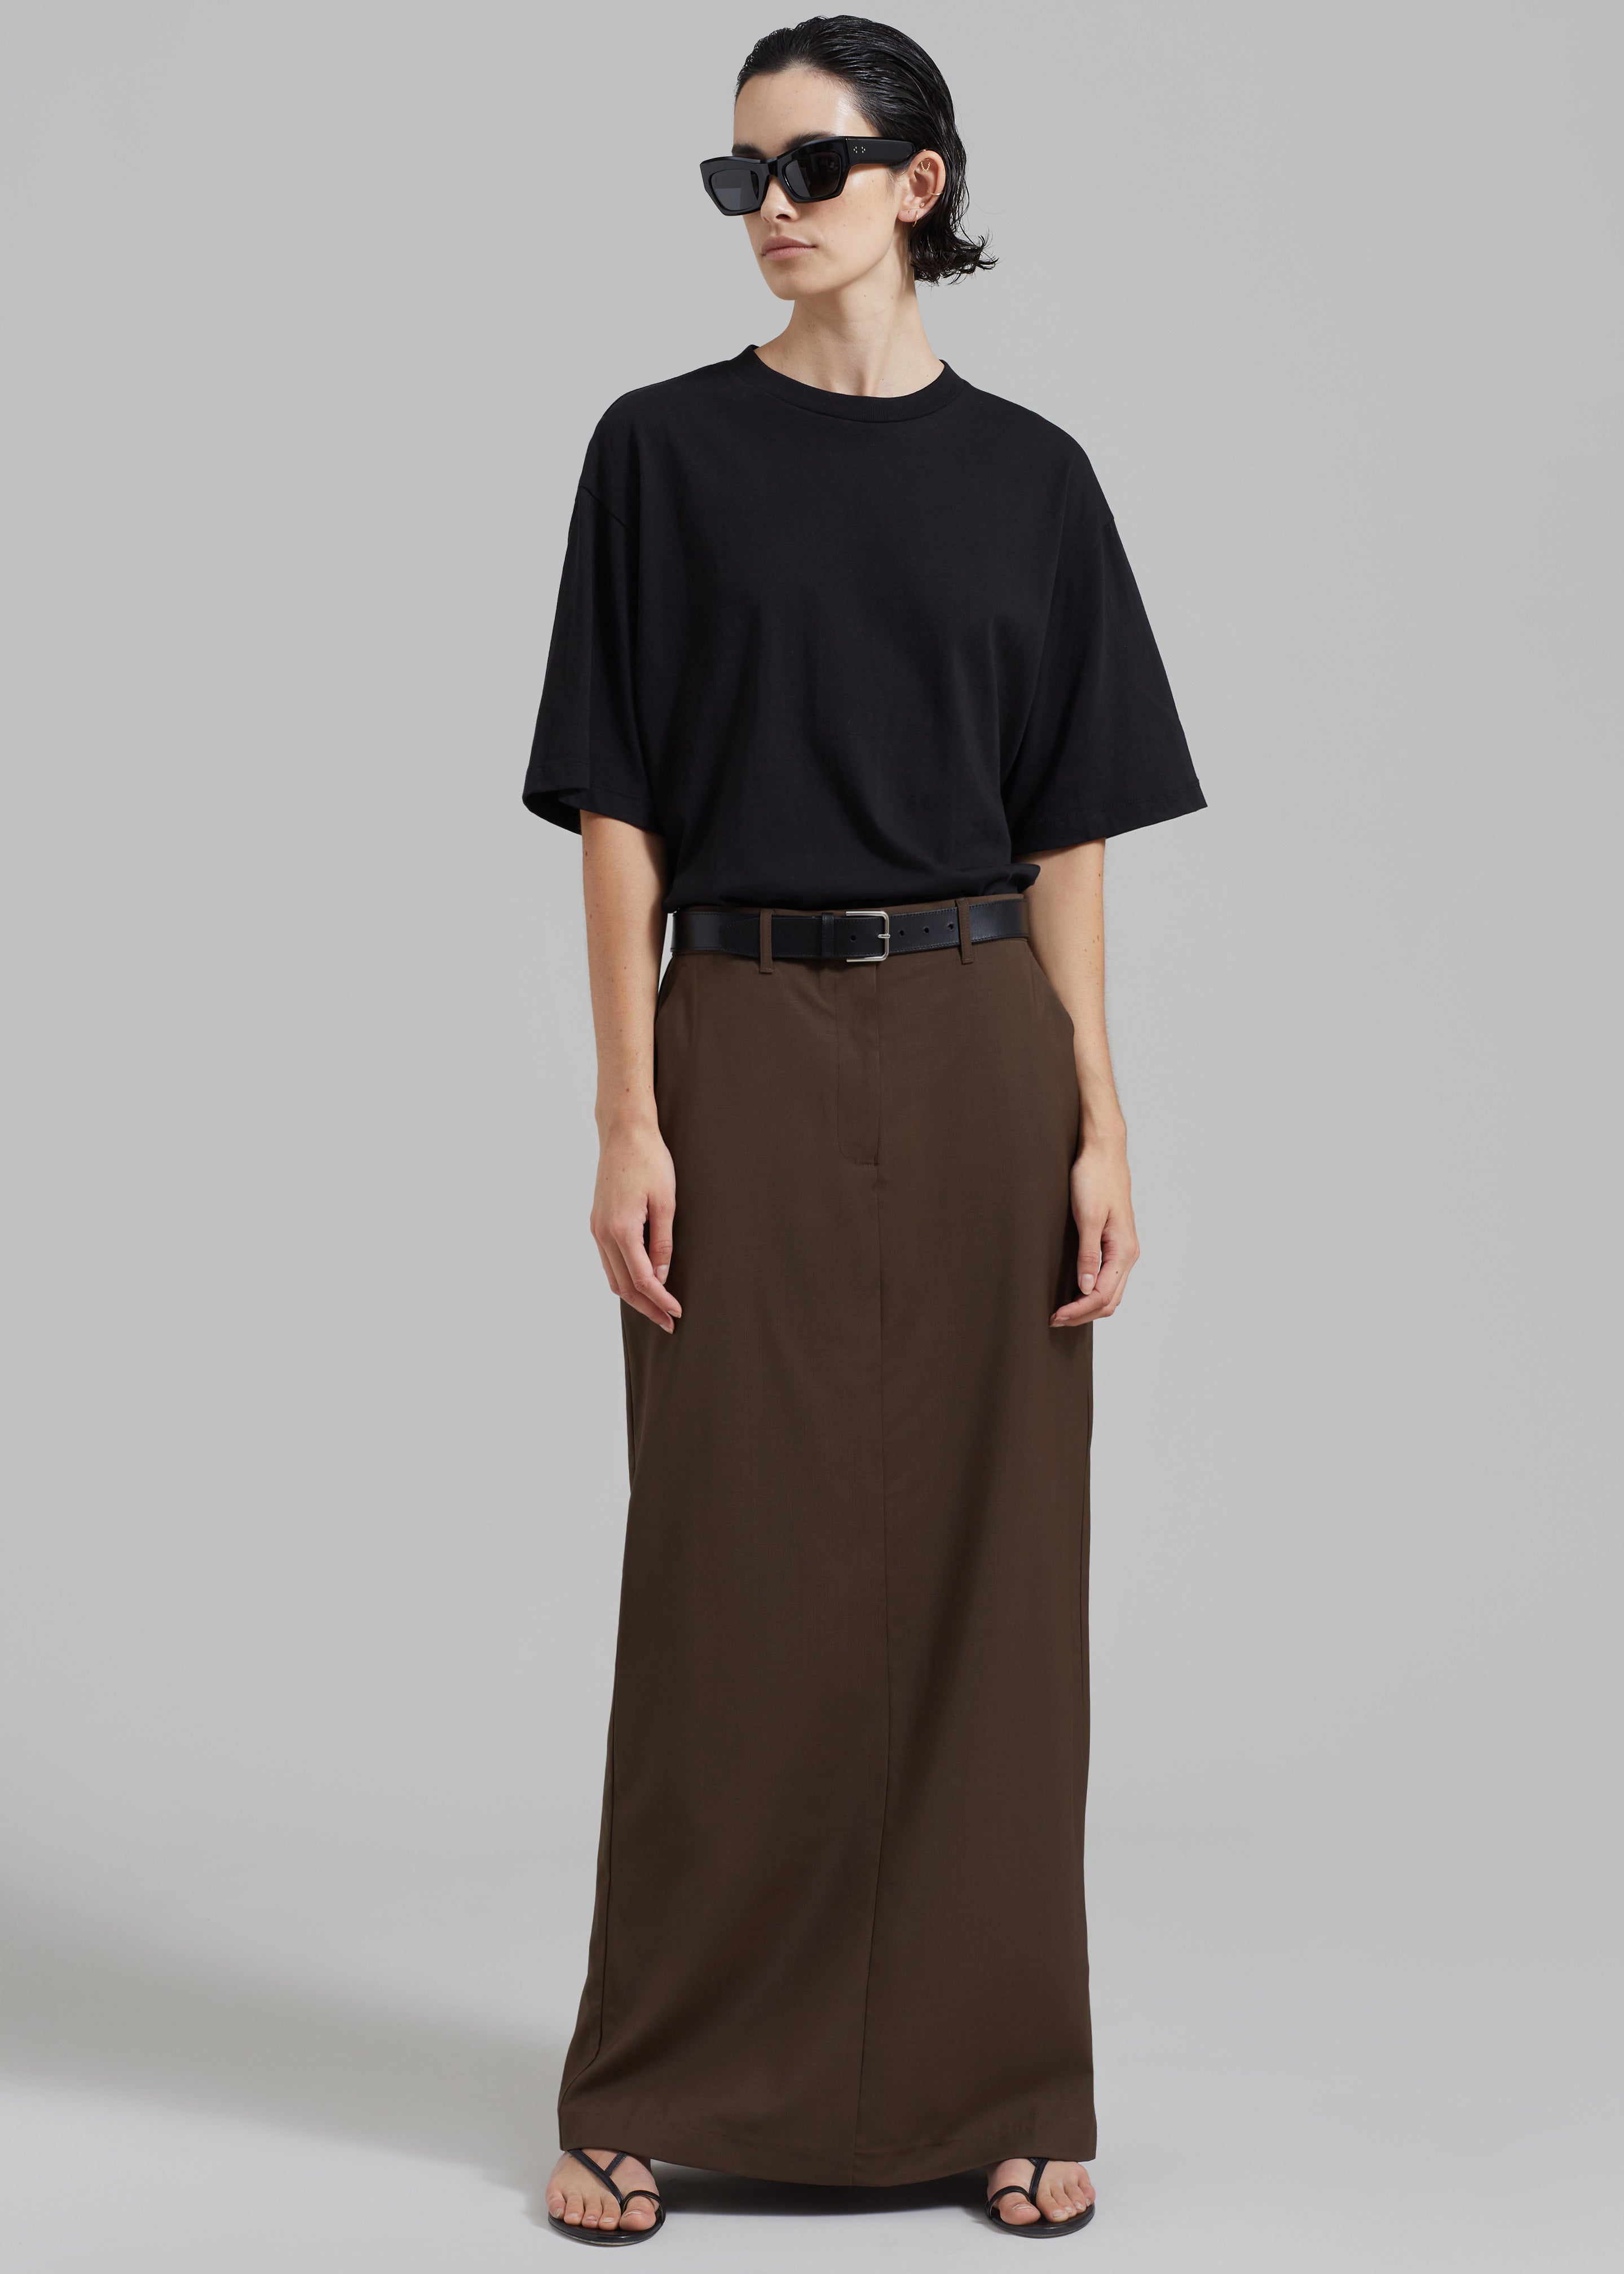 Matteau Relaxed Tailored Skirt - Coffee - 4